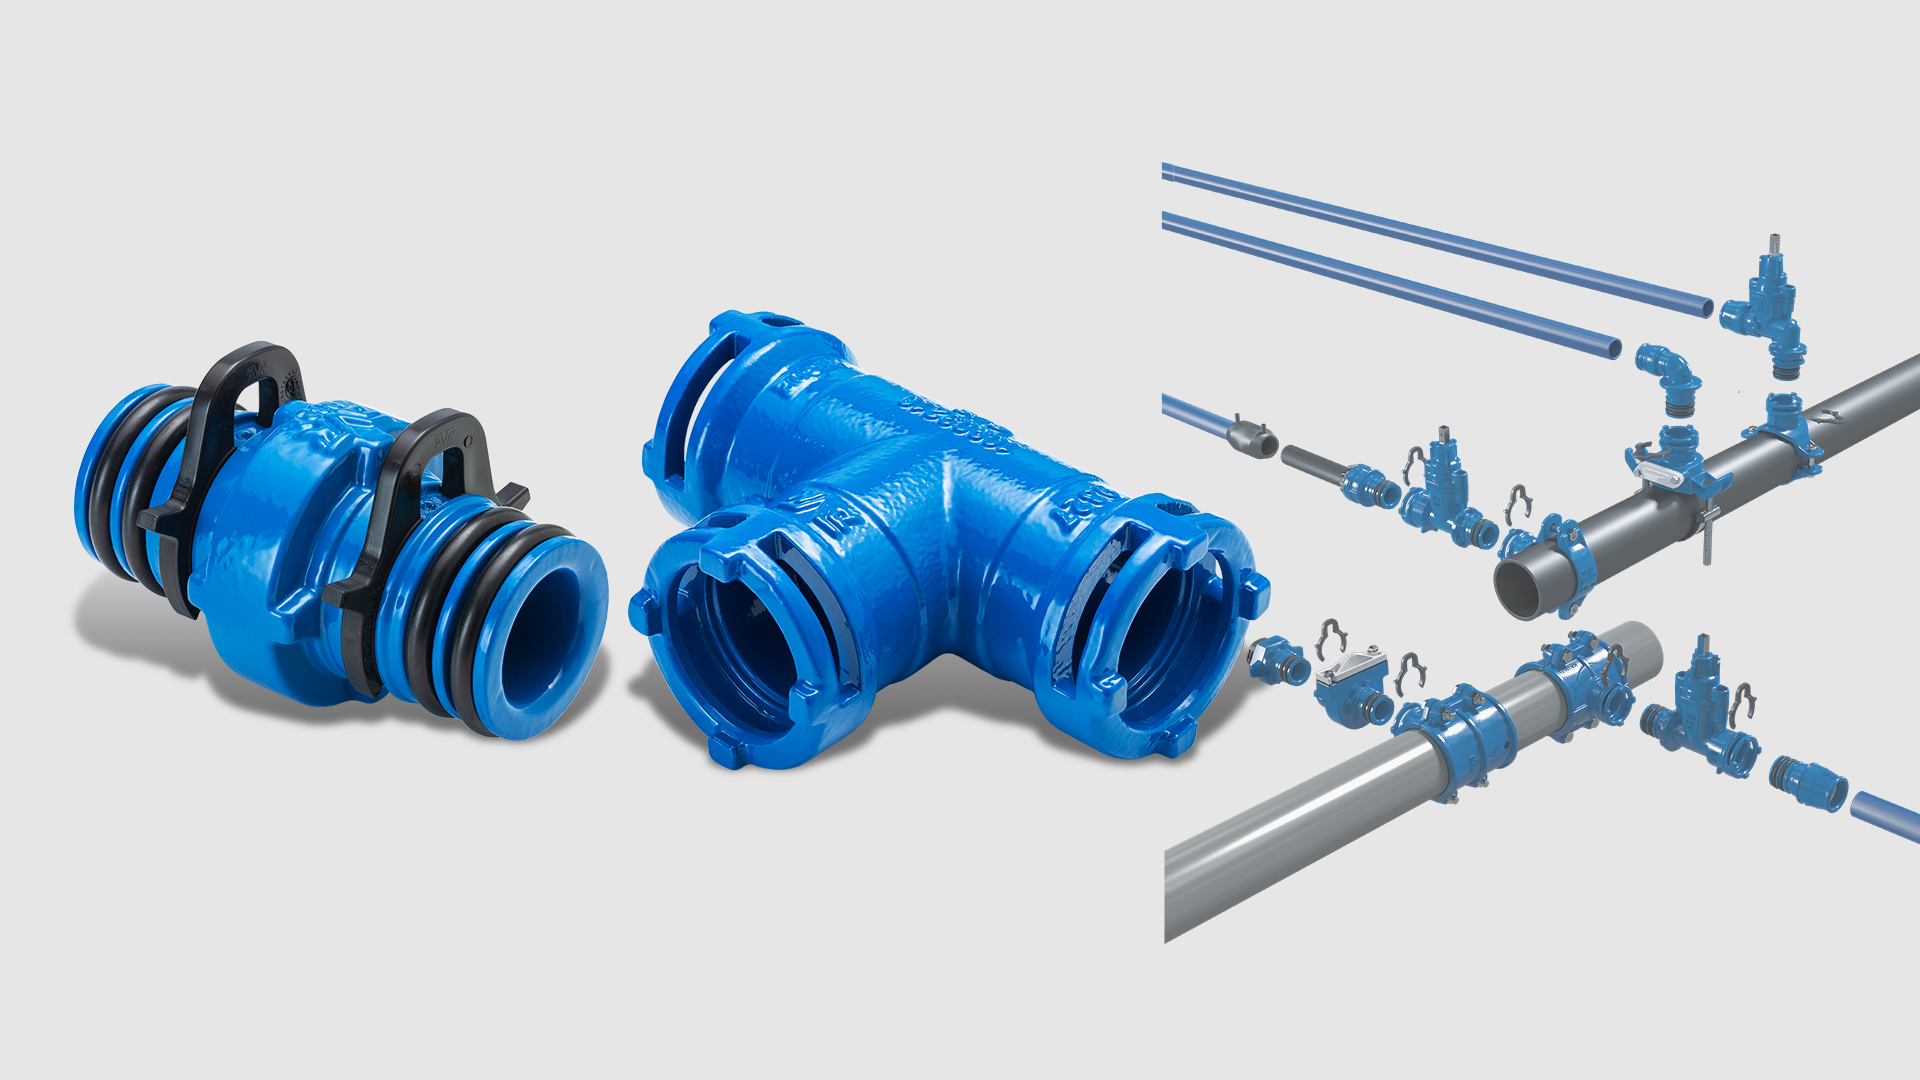 Two new fittings to our Supa Lock™ threadless service connection system